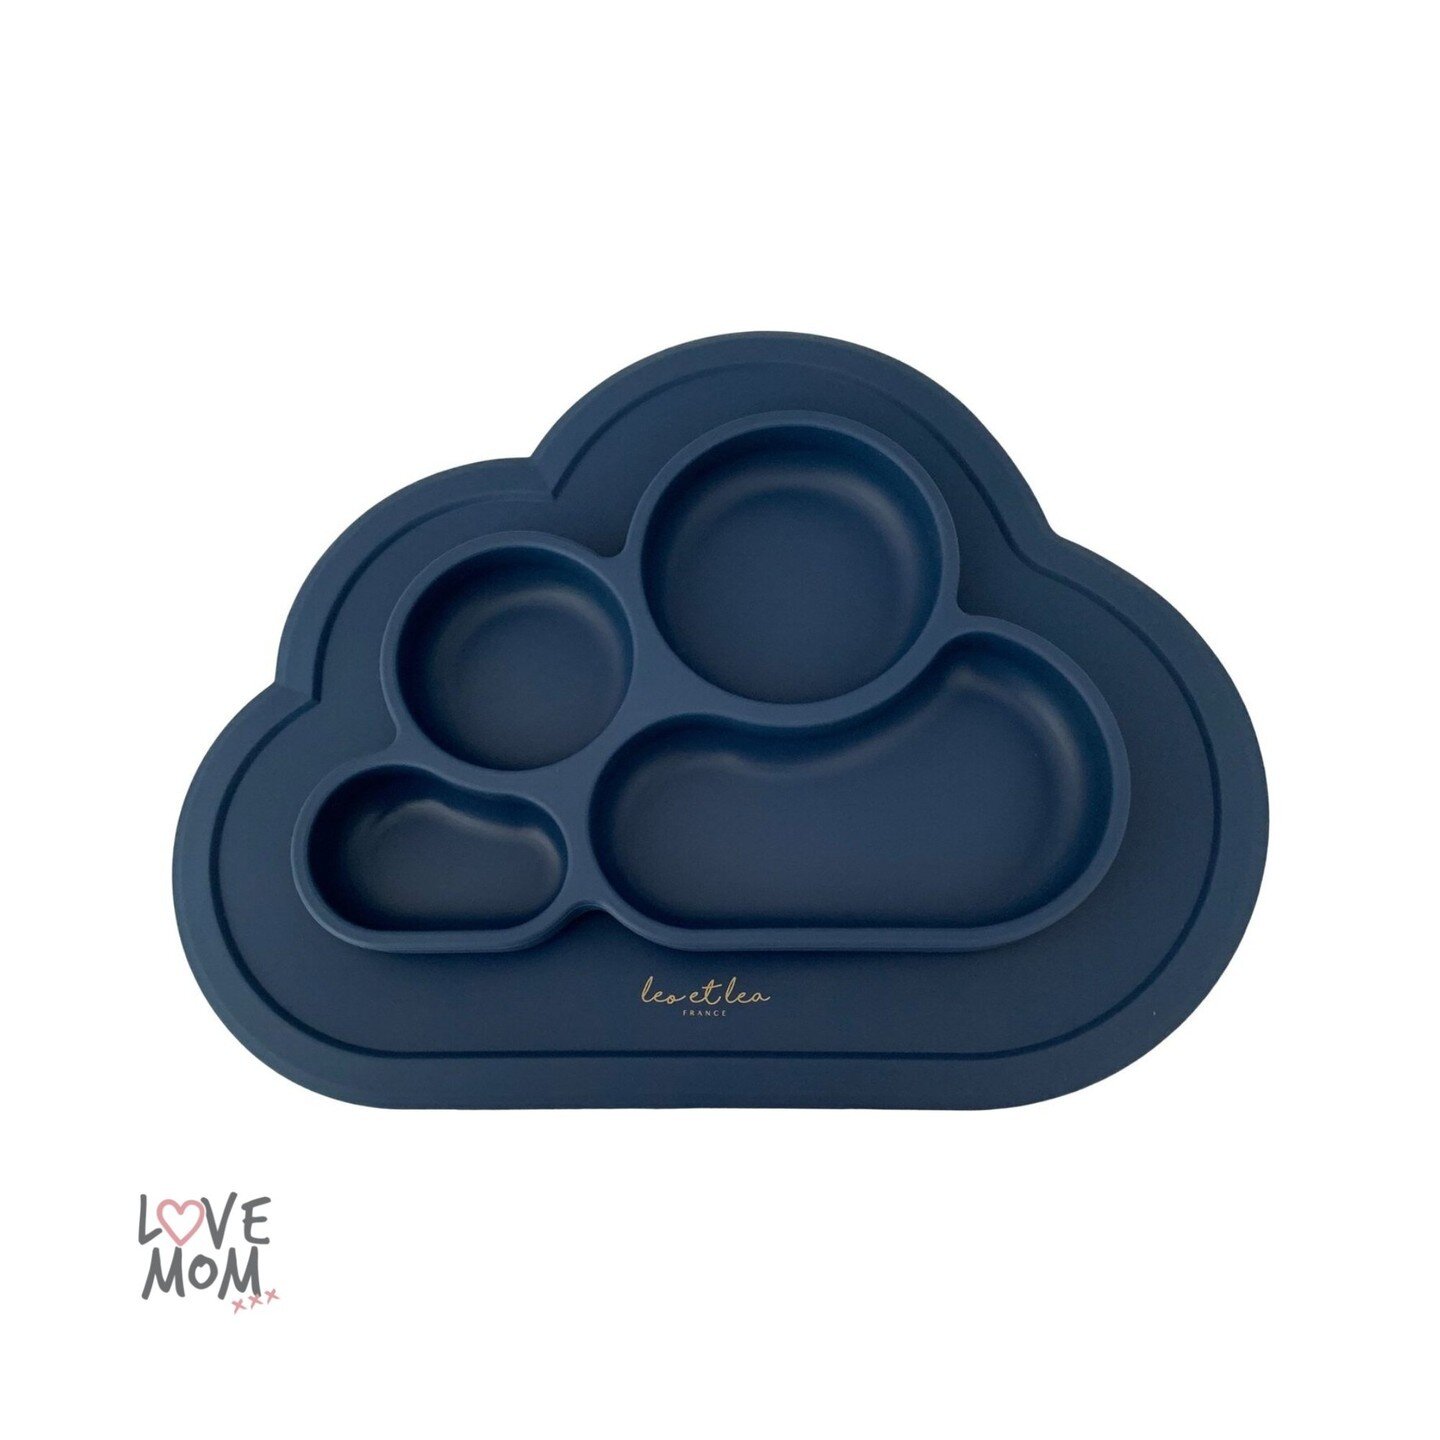 This super cute Cloud Plate is here to make meal times exciting for your little one and easy for you!⁠
⁠
Great for separating food groups for any fussy eaters and stays in place to contain the inevitable spills during meals and prevents bowls and pla